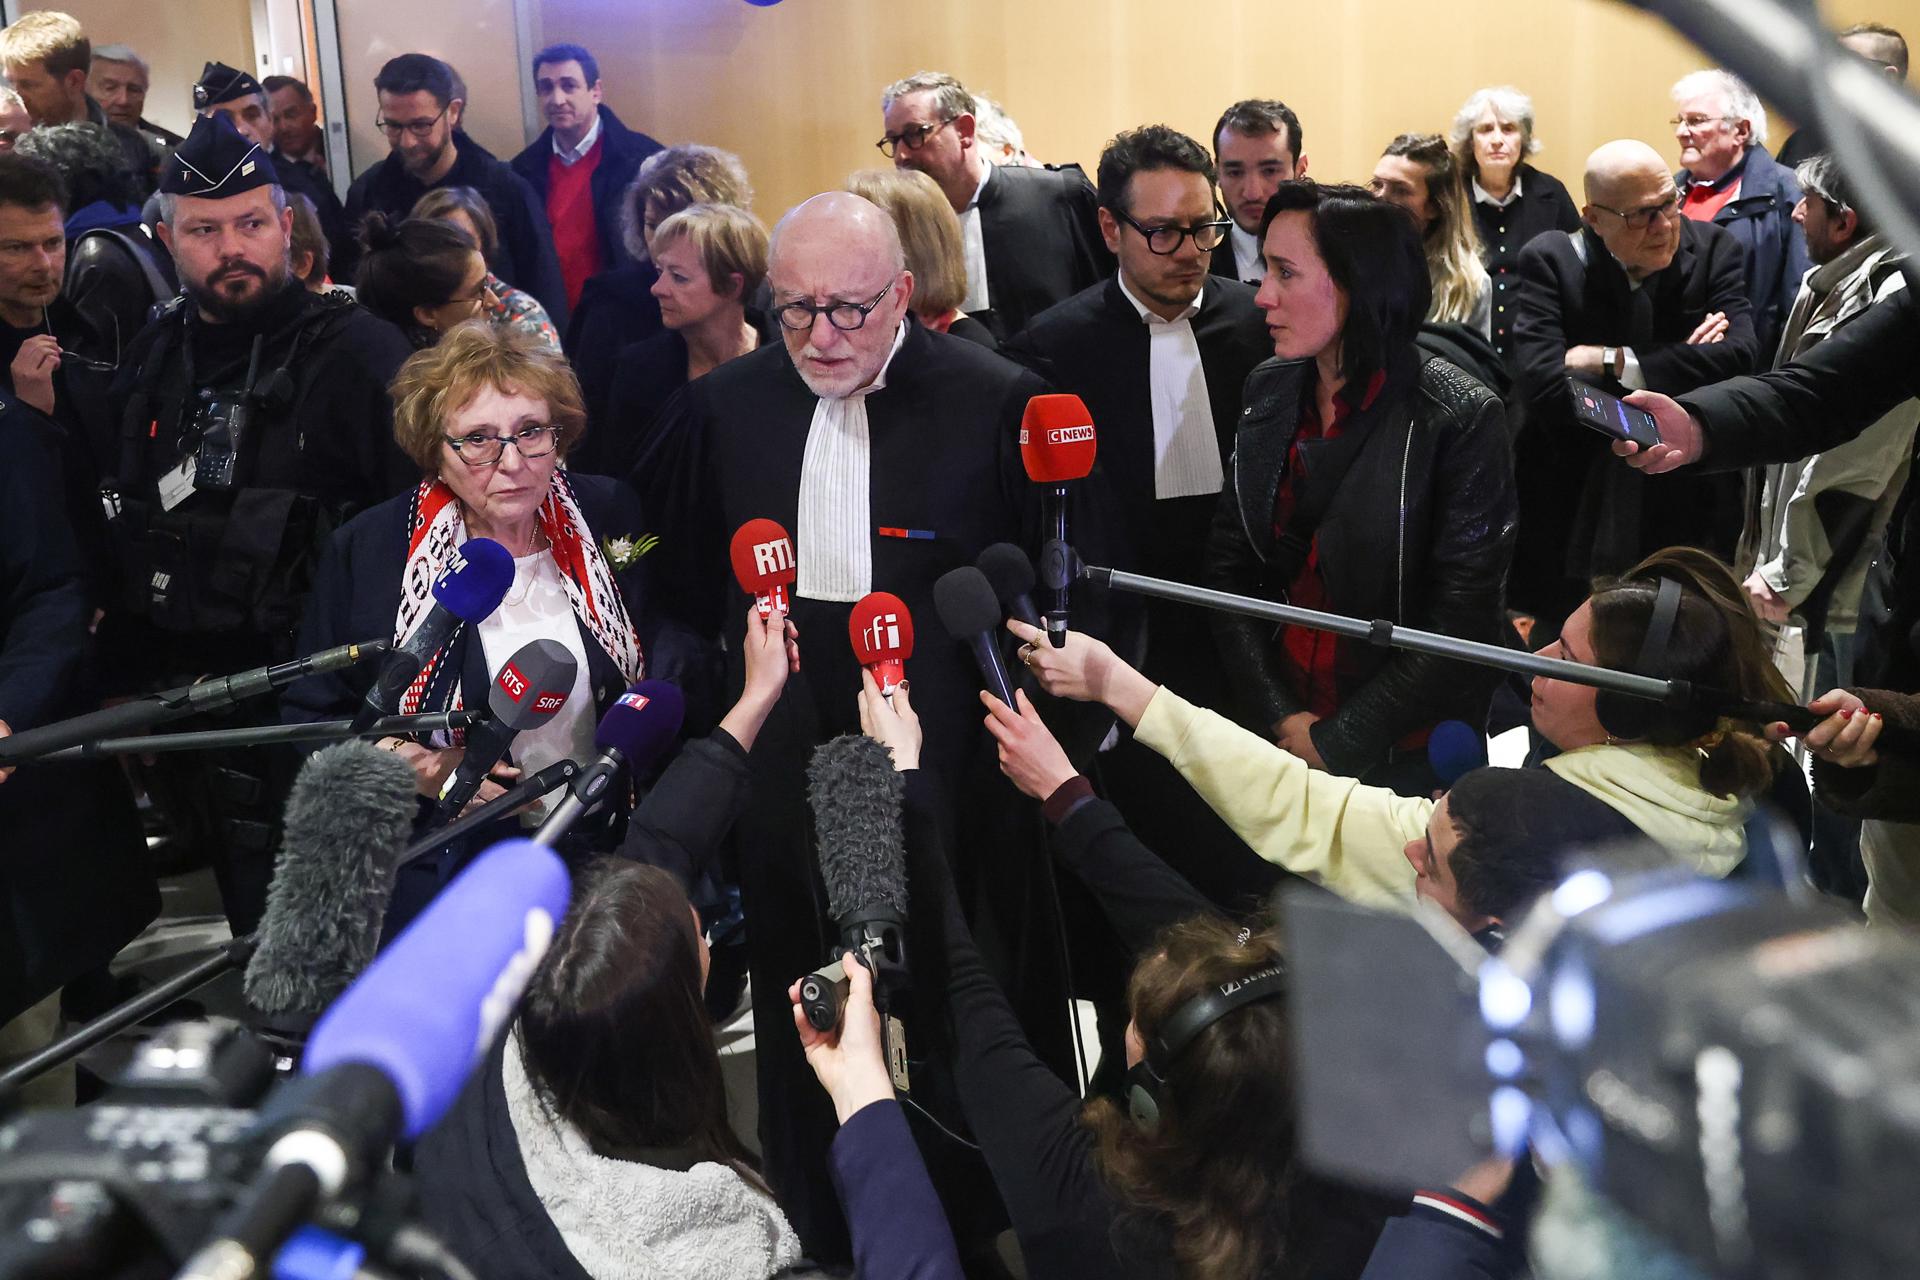 French lawyer Alain Jakubowicz (C) and President of the association Entraide et Solidarite AF447 (Cooperation and Solidarity AF447), Danielle Lamy (L) talk to the press on the verdict's day in the trial relating to the crash of the Rio-Paris flight AF447 in 2009, at the Palais de Justice in Paris, France, 17 April 2023. EFE/EPA/MOHAMMED BADRA